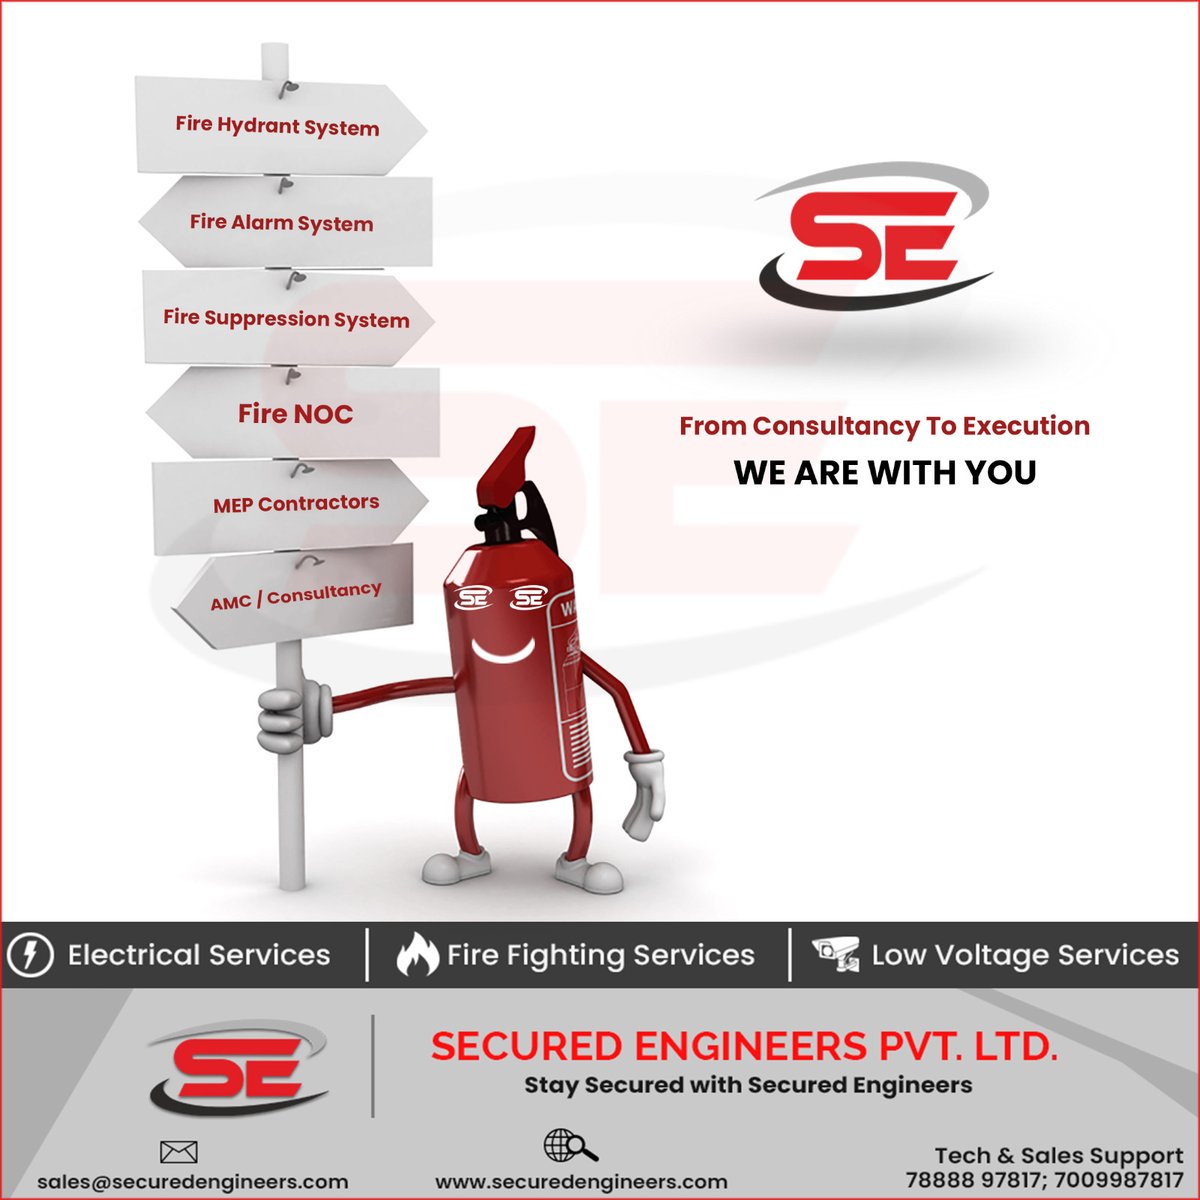 From consultation to Execution, We are with you.
#fire #firesafety #fireconsultants #firefighting
Secured Engineers Pvt. Ltd. | Seoz Fire
Call Now: 070099 87817
📩 Email: sales@securedengineers.com
👉 Website: securedengineers.com